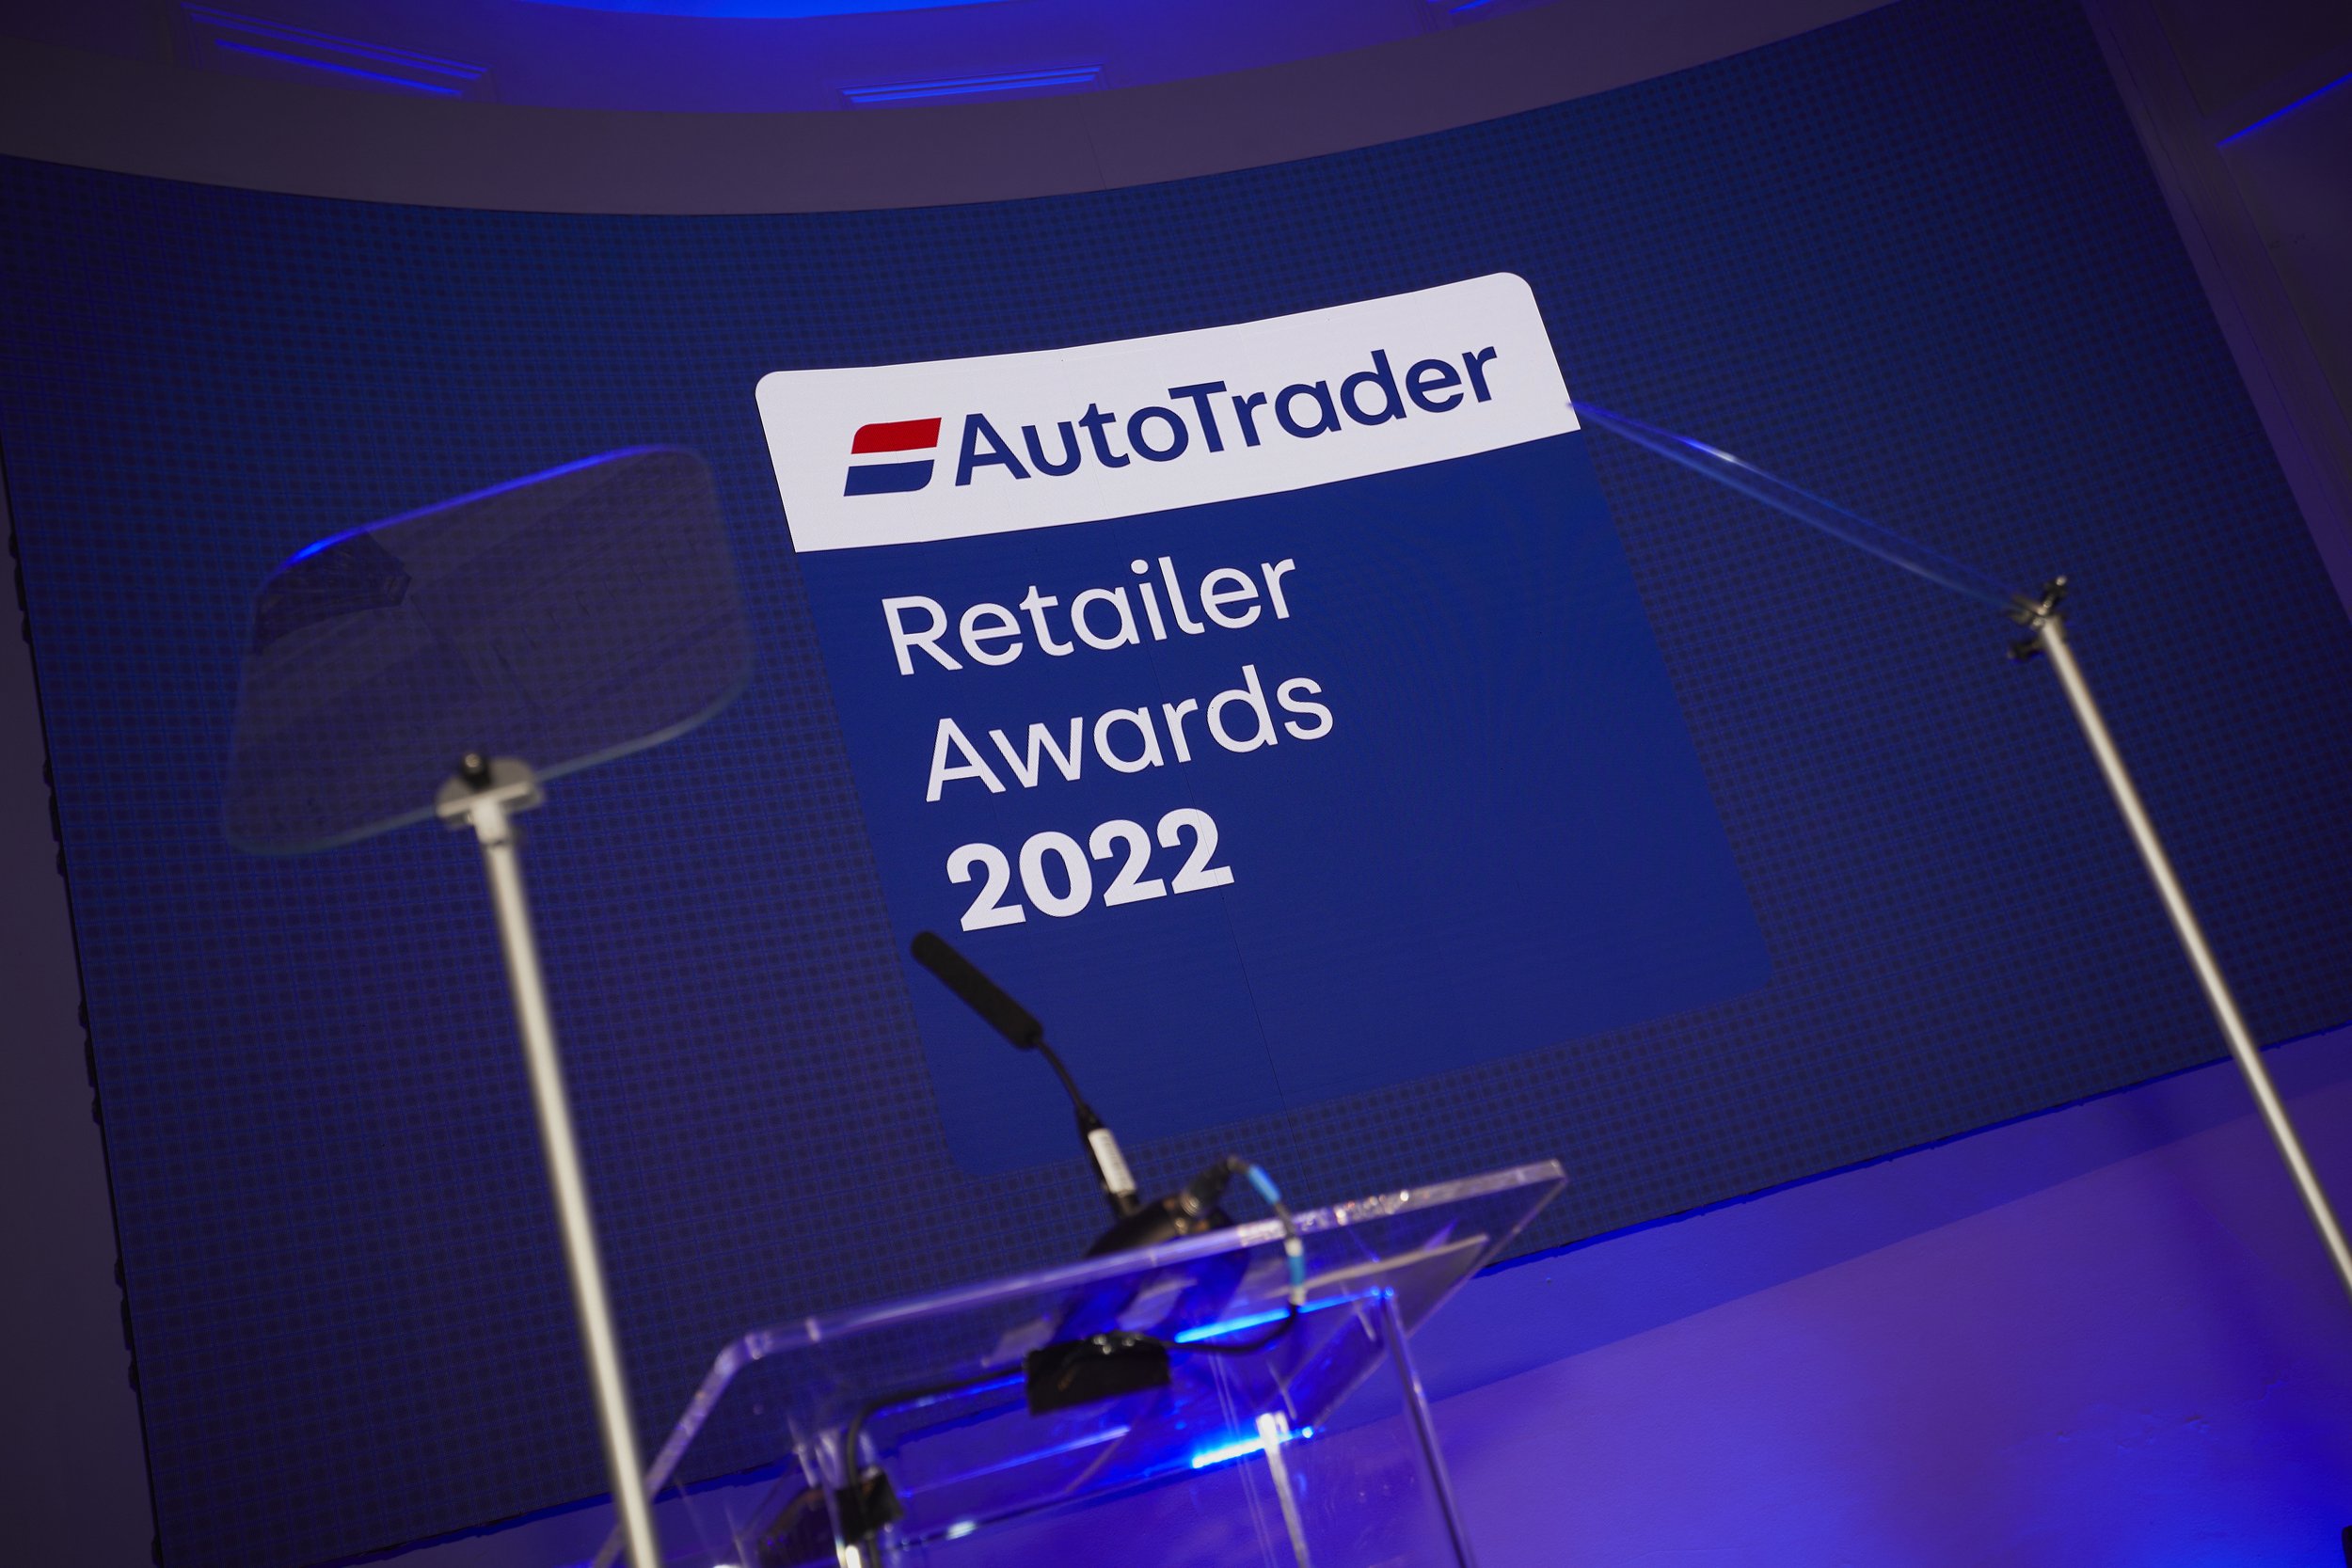 What did we learn at the Auto Trader Retailer Awards 2022?